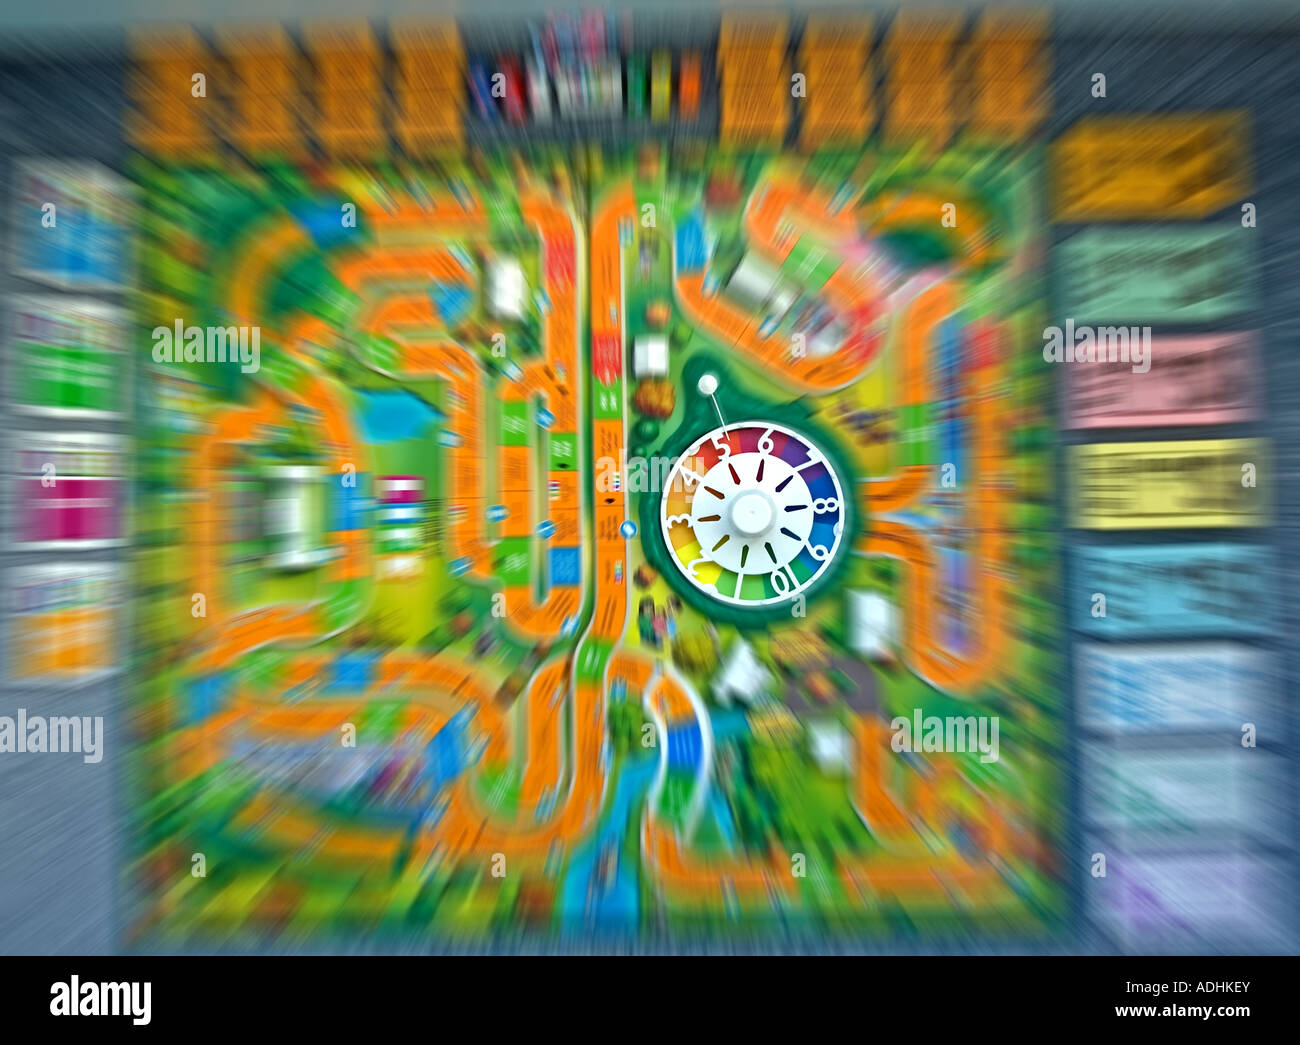 A view of The Game of Life (also known as LIFE), a board game originally  created in 1860 by MIlton Bradley Stock Photo - Alamy